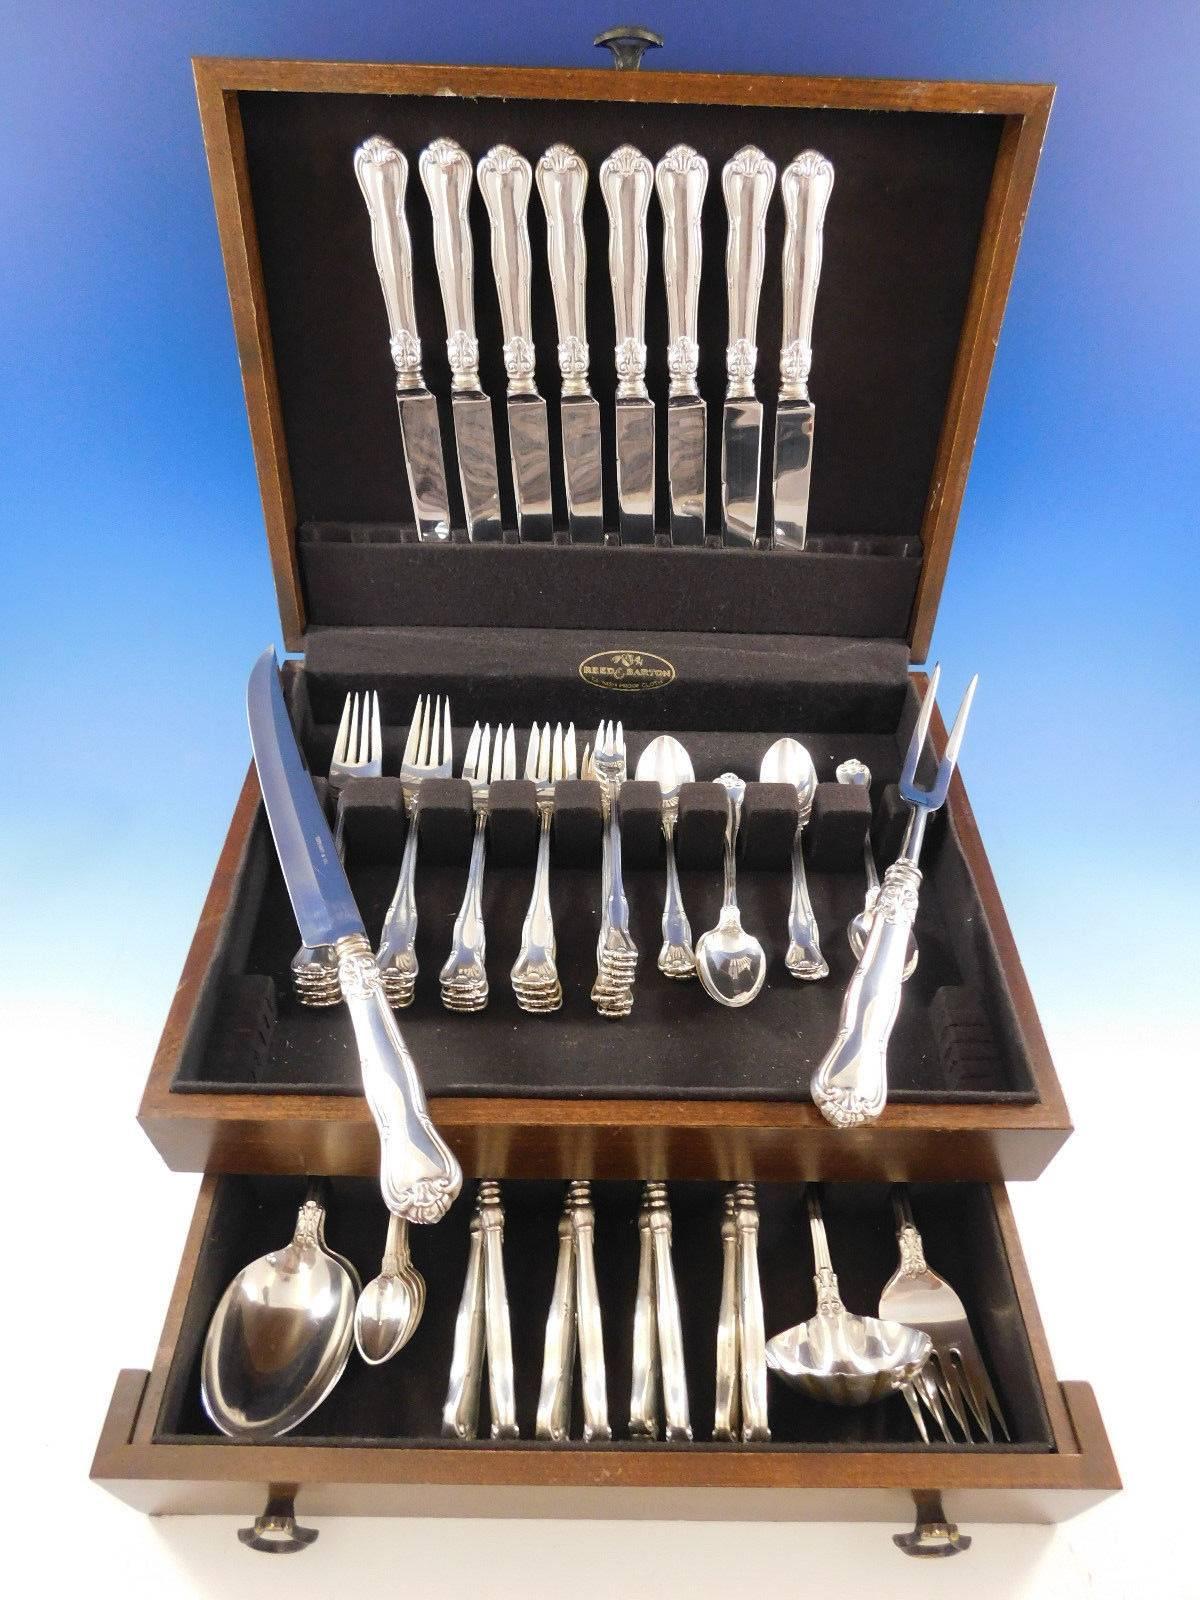 Provence by Tiffany & Co. sterling silver flatware set of 63 pieces. This set includes: Eight dinner size knives, 9 3/4